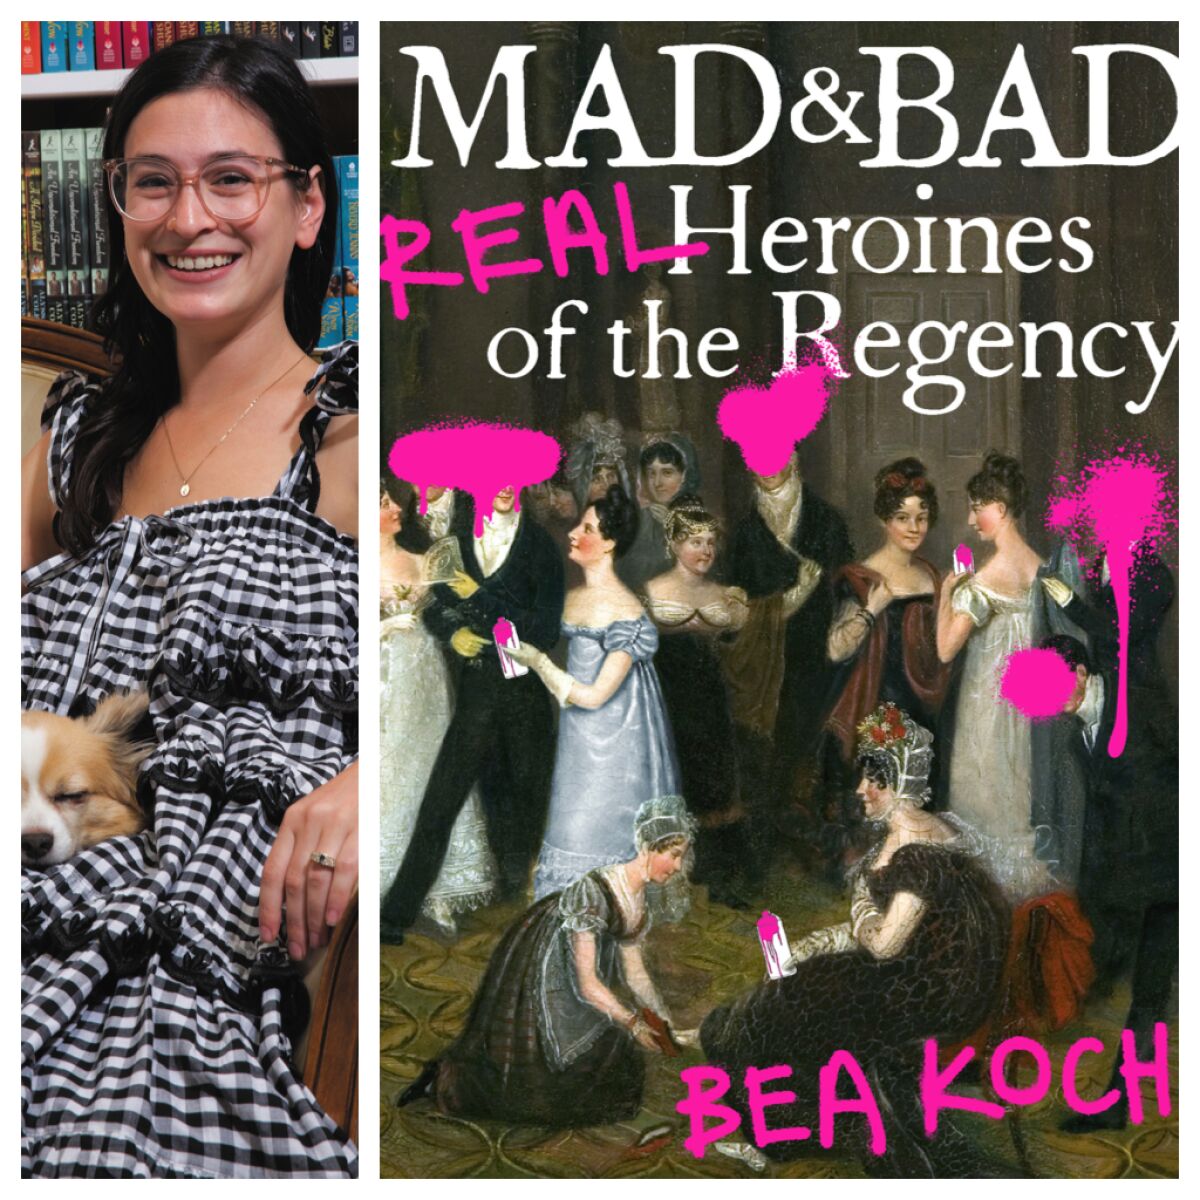 Bea Koch, author of "Mad & Bad."